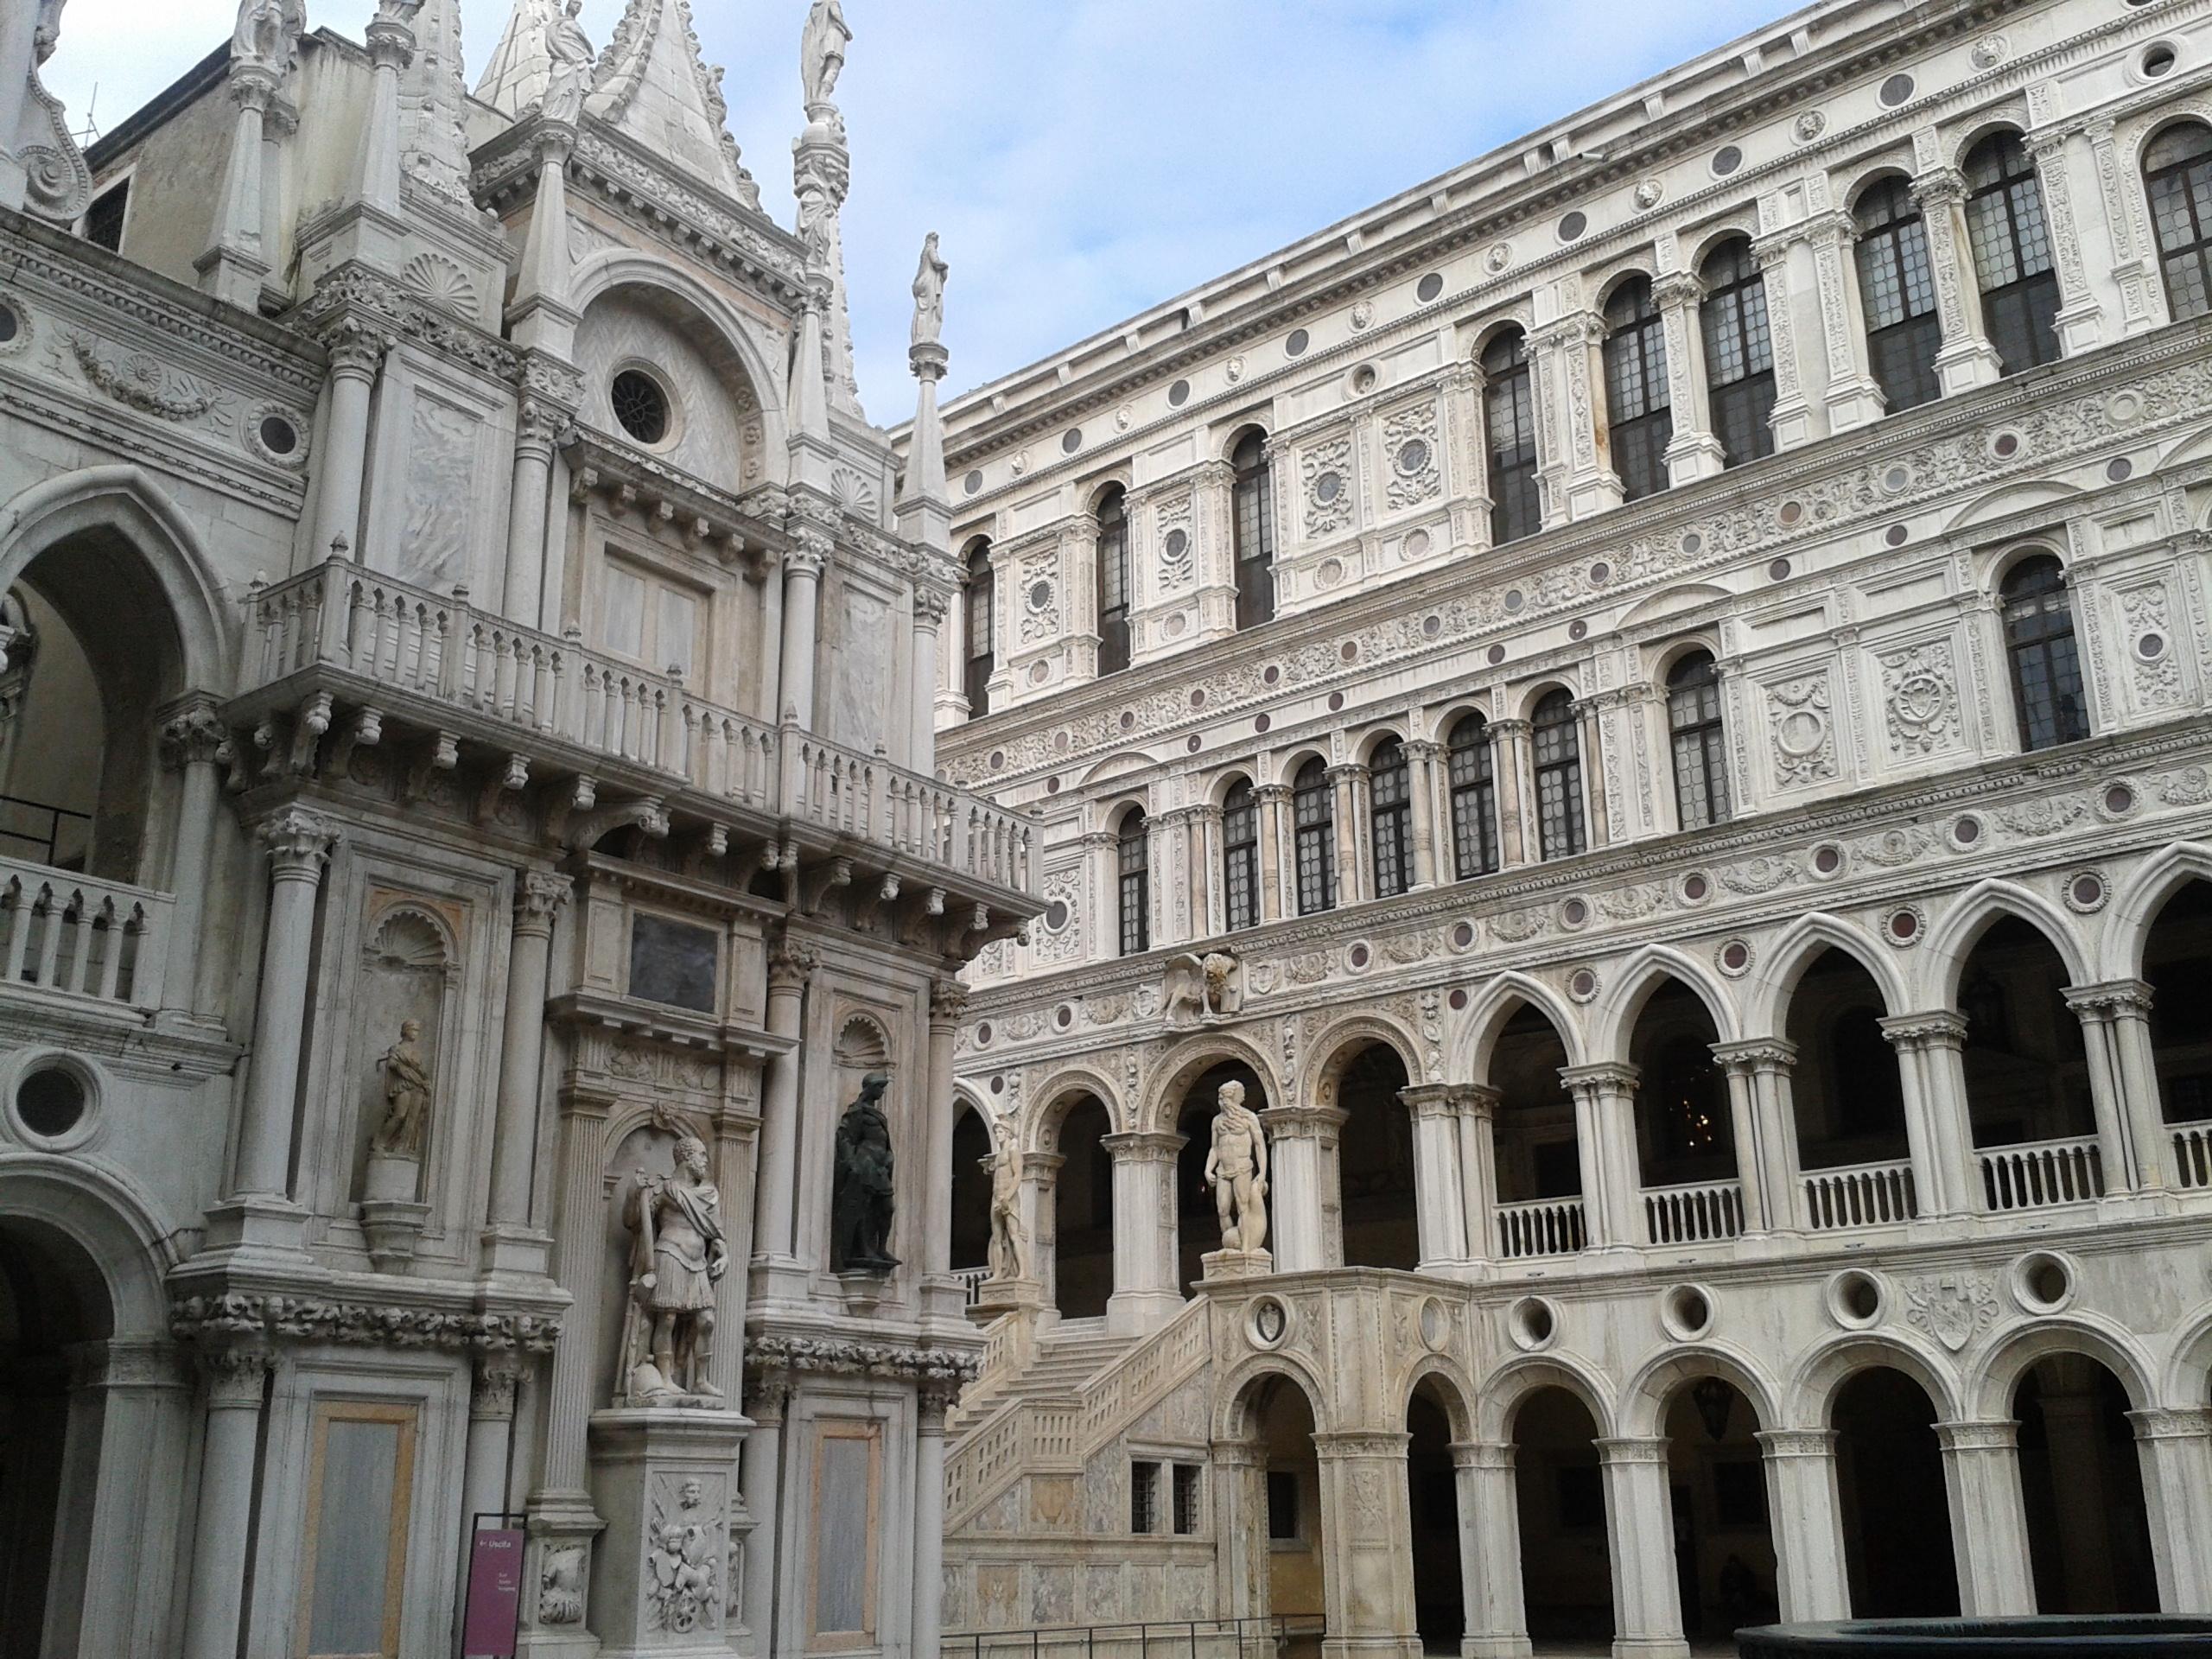 Cover image of this place Palazzo Ducale